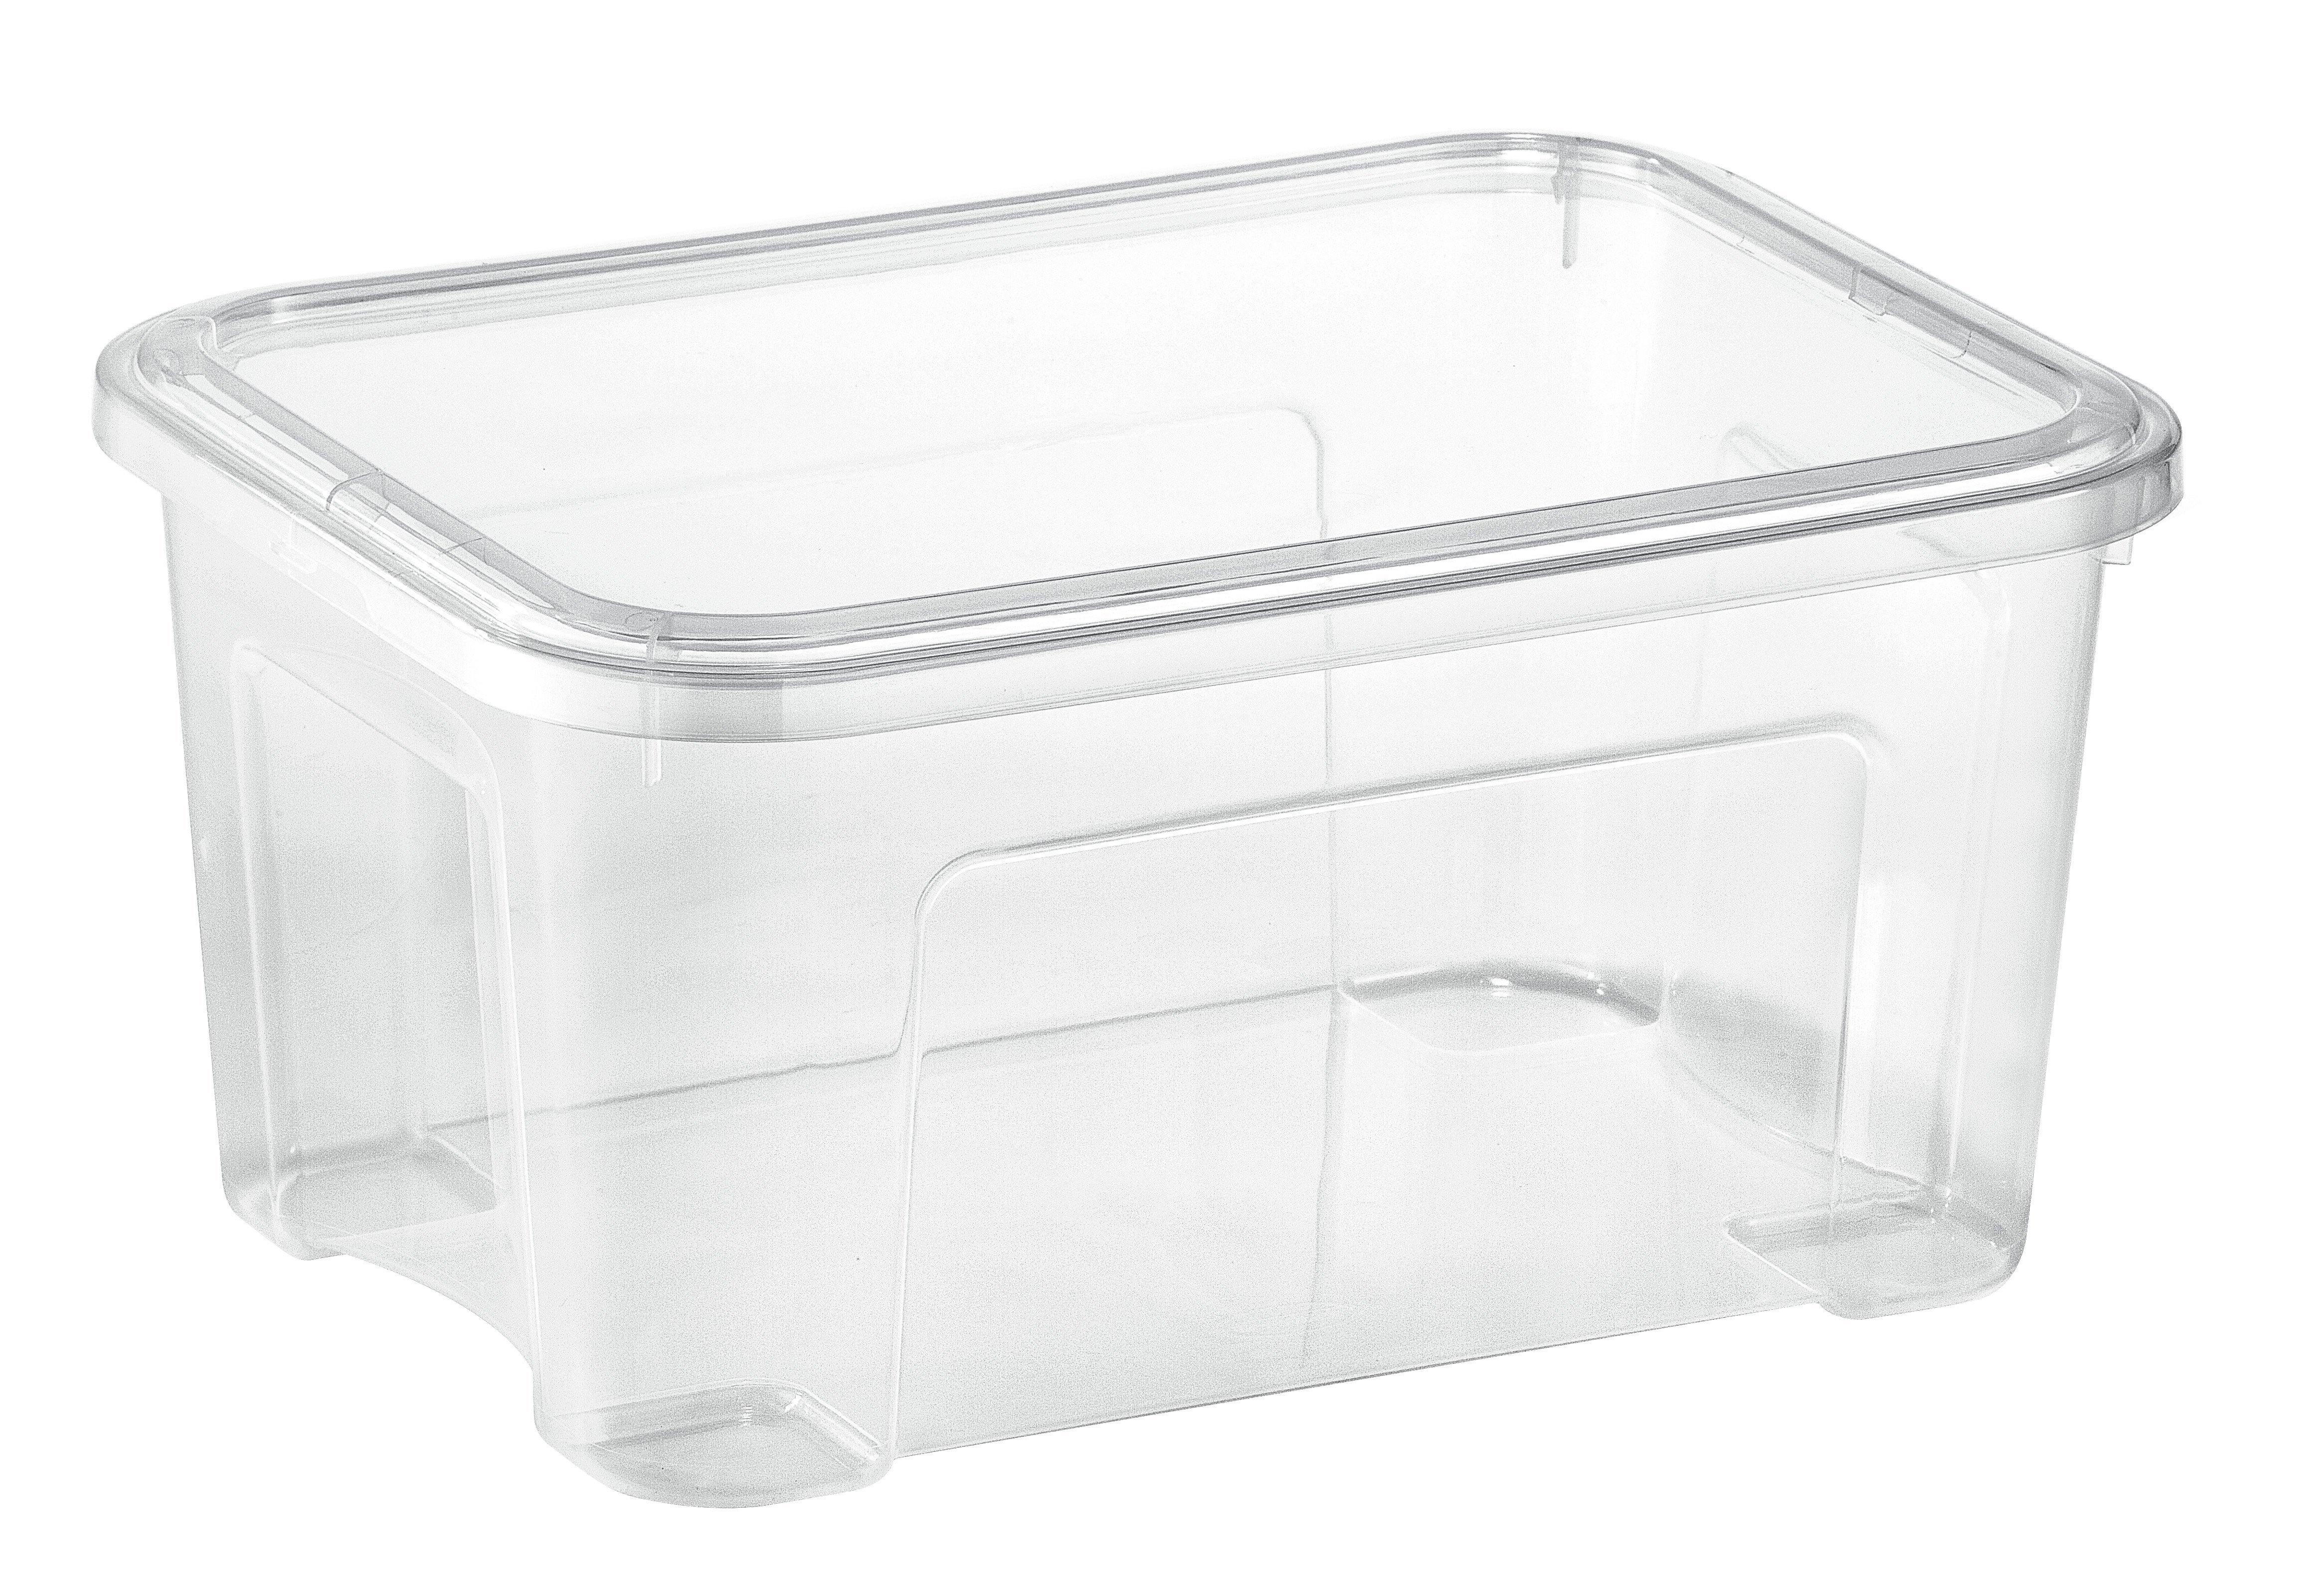 Tontarelli, 13 Ltr. Combi Box With Transparent Cover - Whole and All